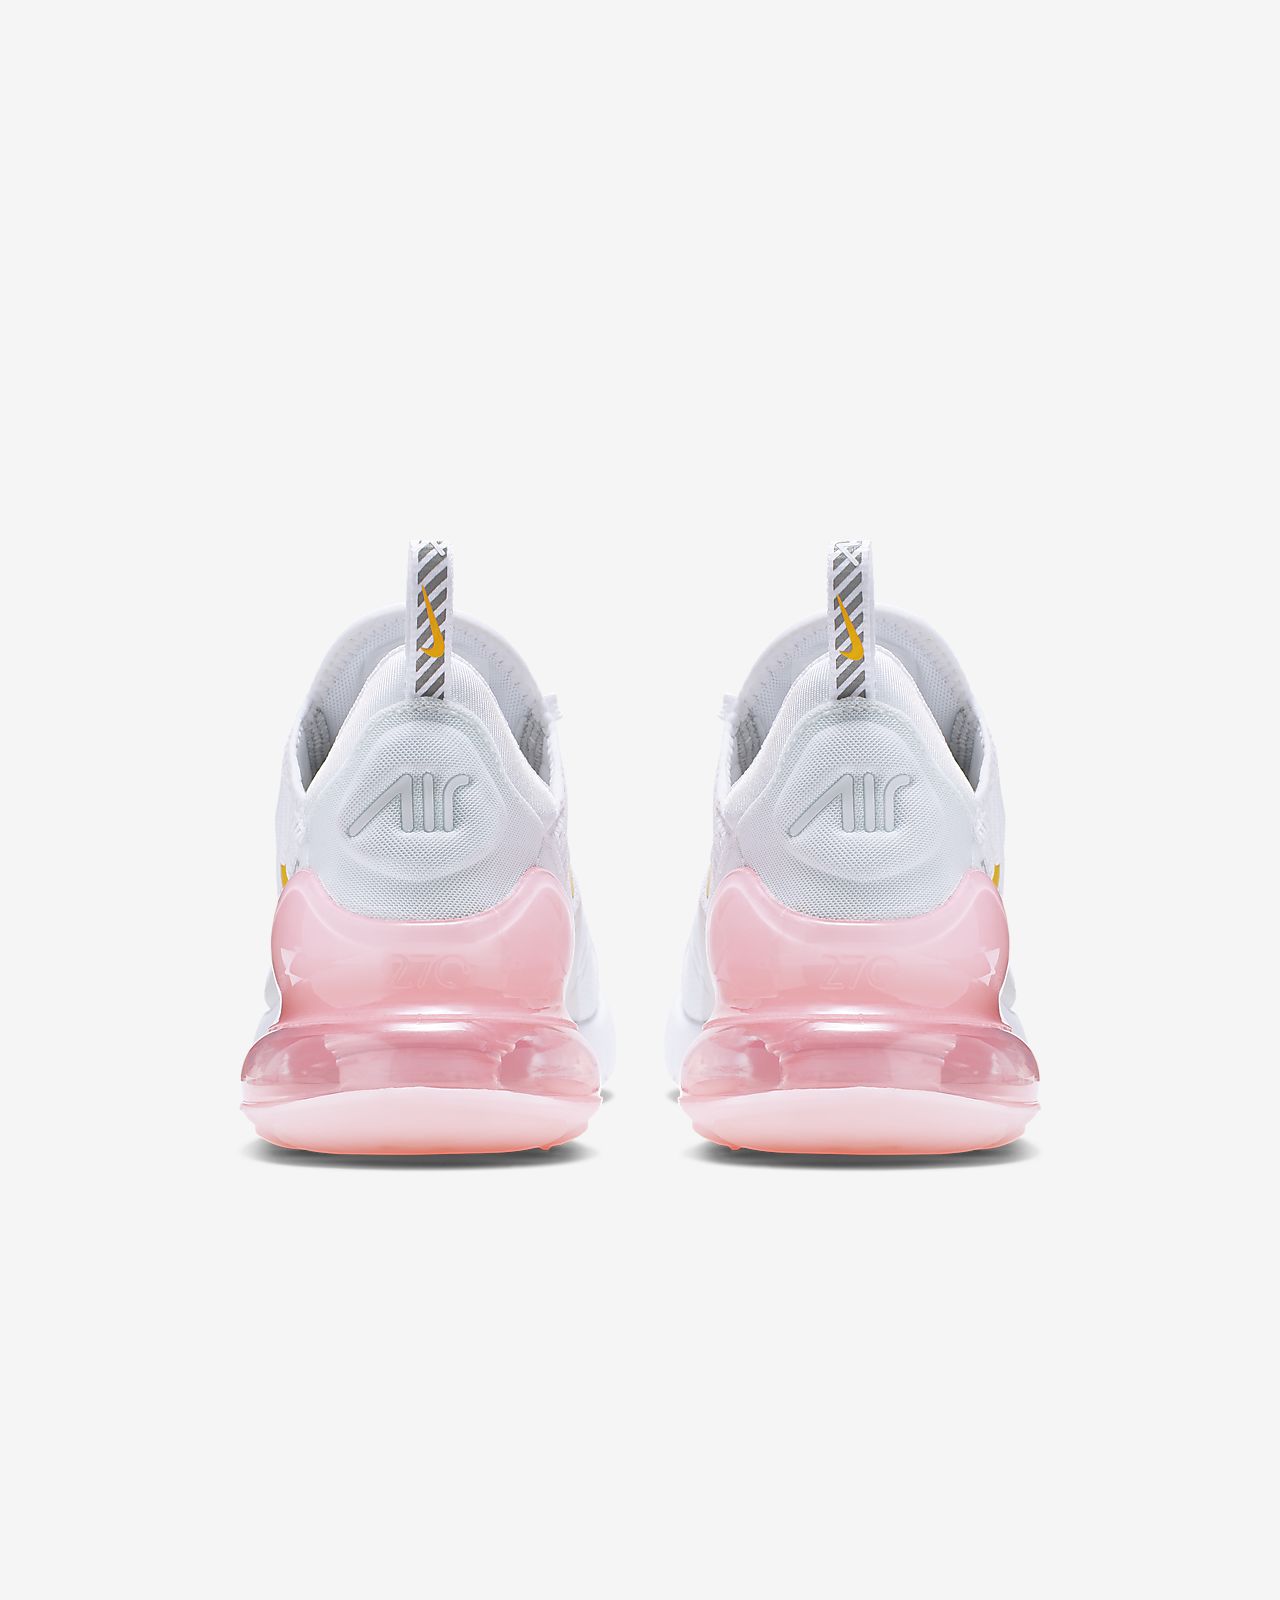 white and light pink air max 270